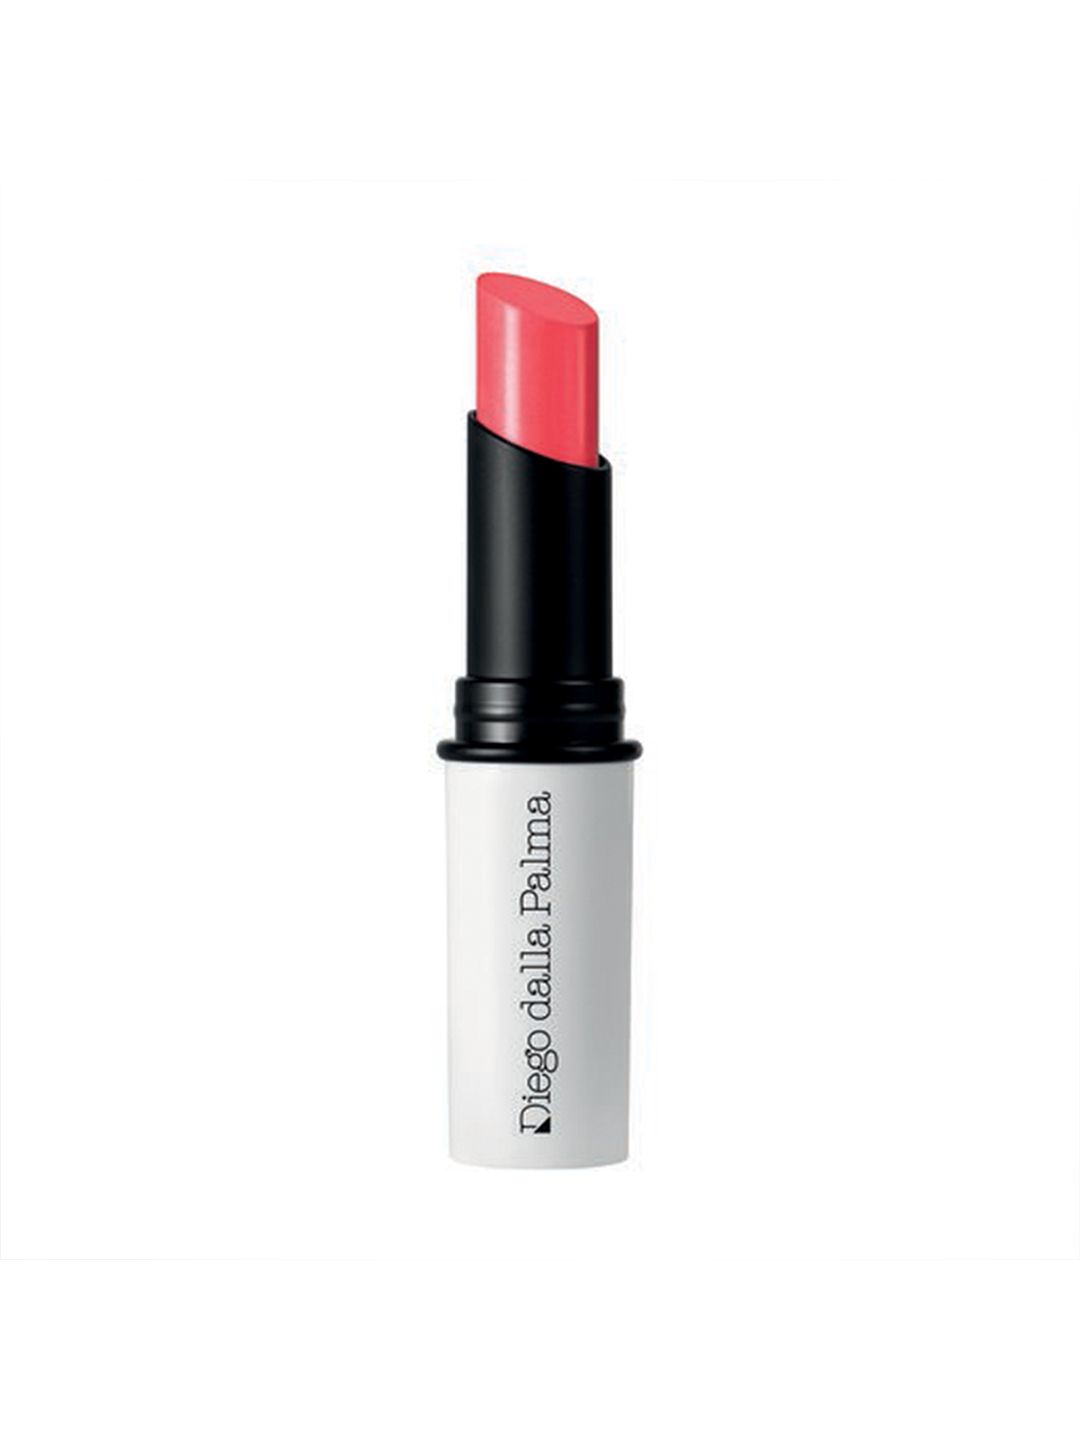 Diego dalla Palma MILANO Semitransparent Shiny Lipstick with Hyaluronic - Salmon Pink 144 Price in India